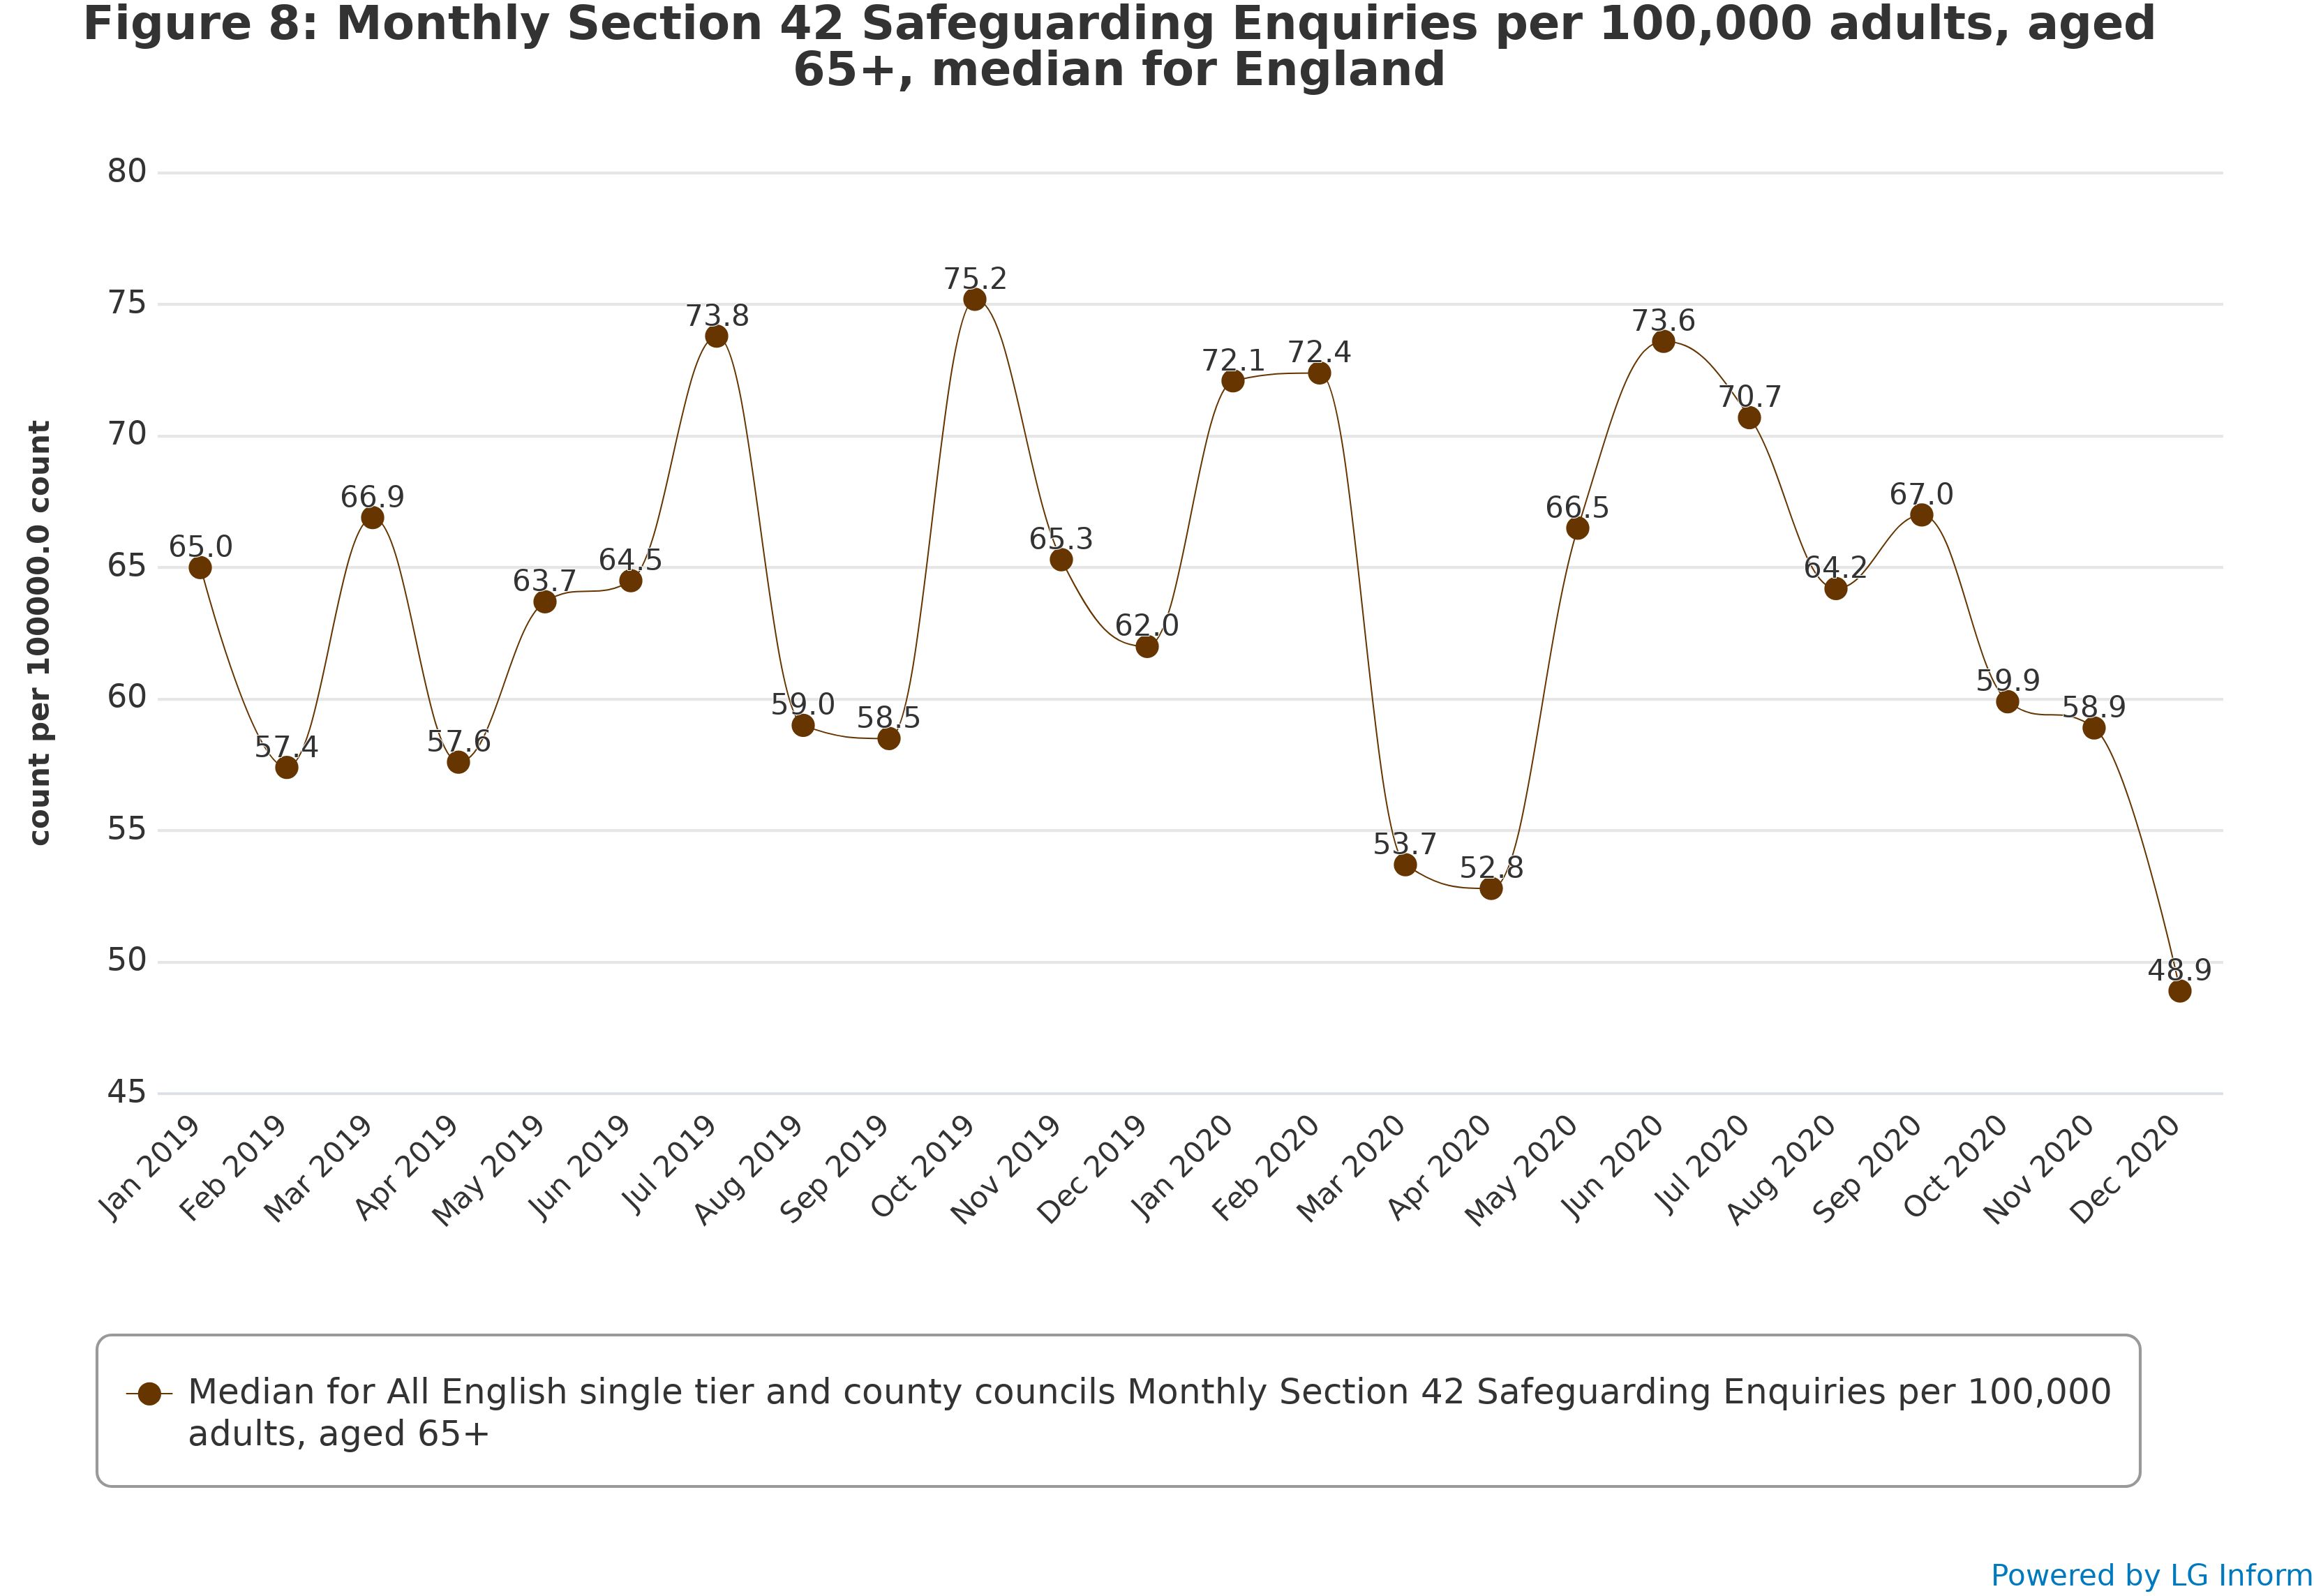 Figure 8: Monthly Section 42 Safeguarding Enquiries per 100,000 adults, aged 65+, median for England